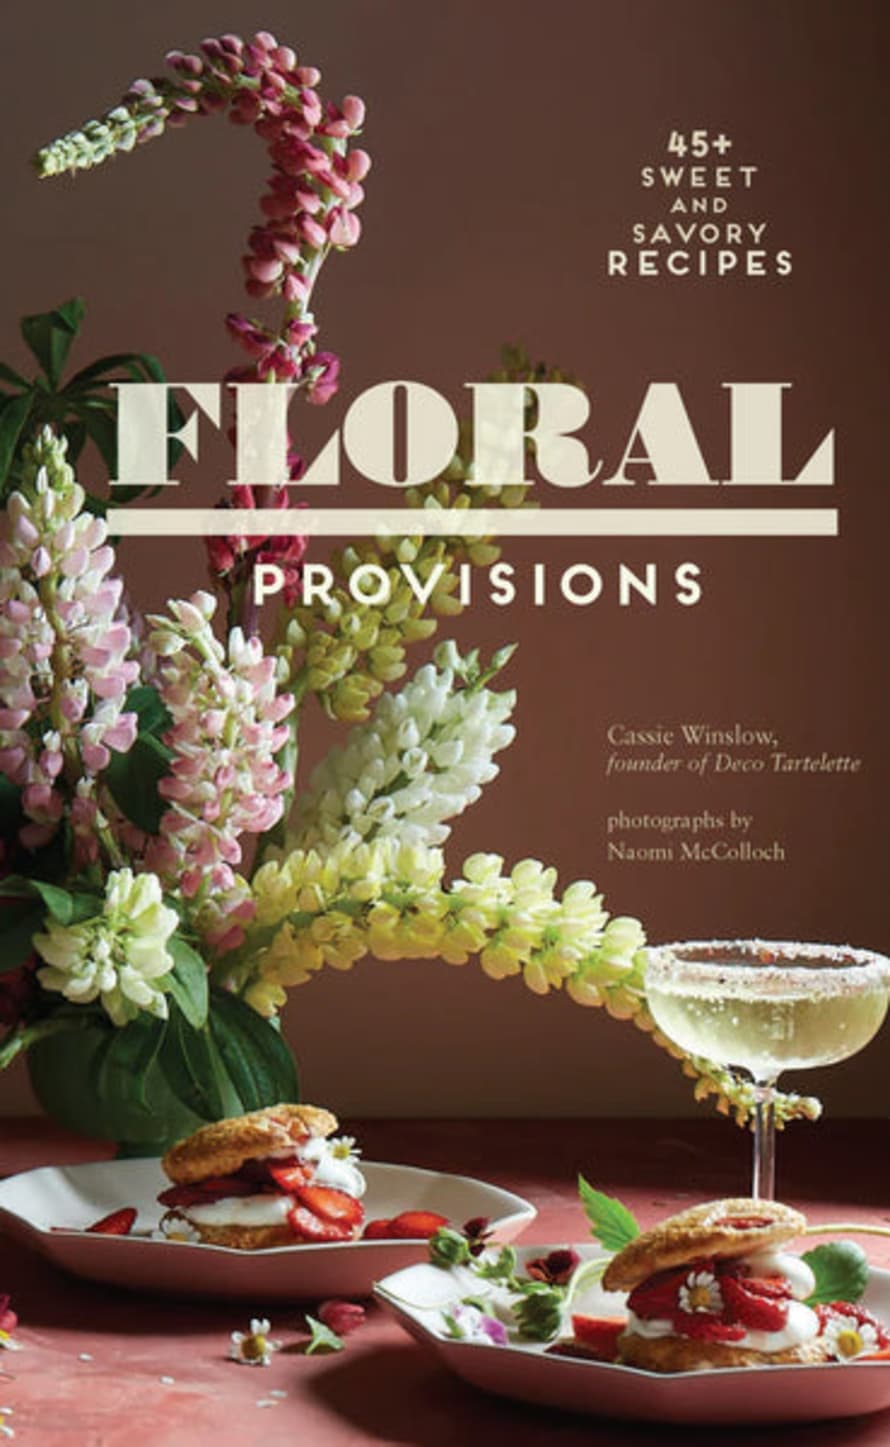 Abrams & Chronicle Books Floral Provisions